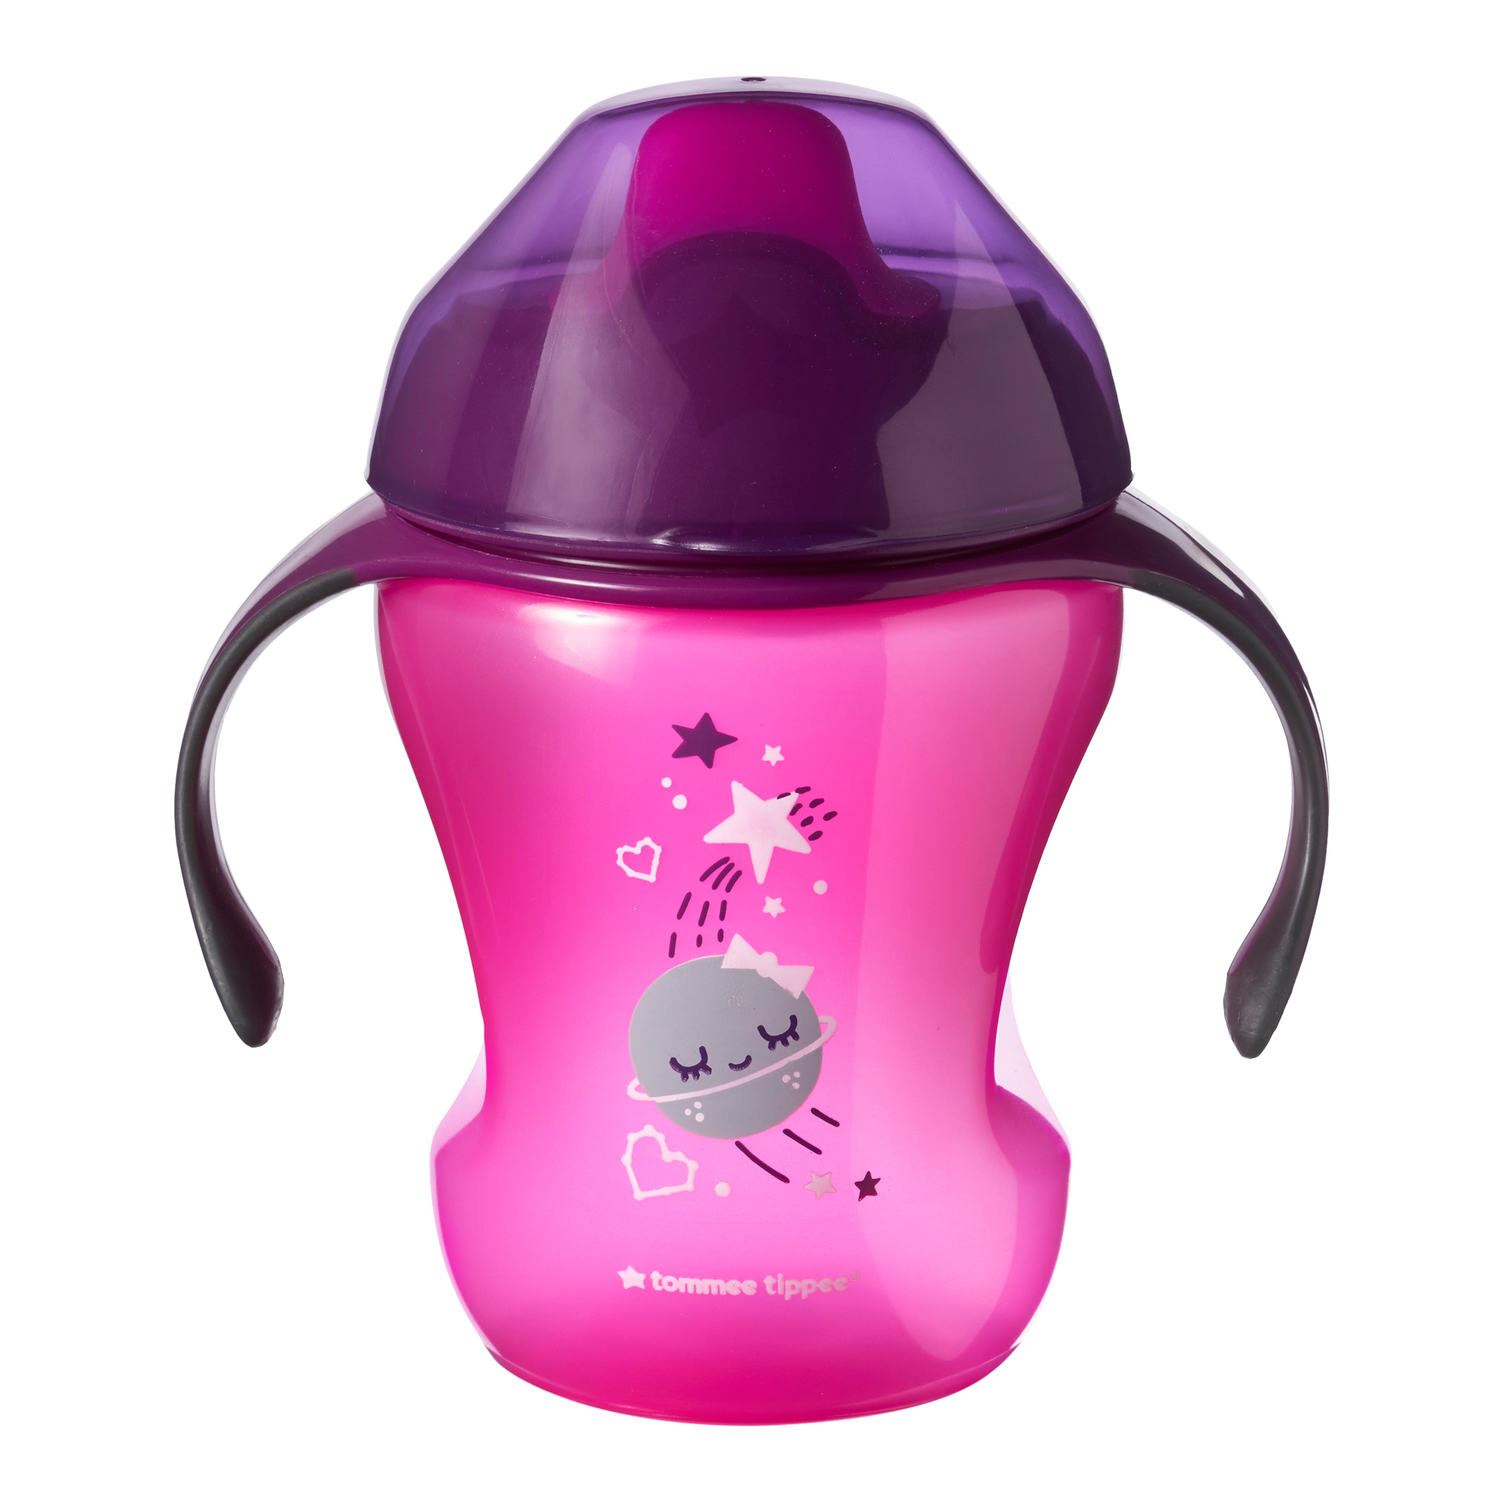 Tommee Tippee Explora Easy Drink 7md+, rosa, 1 stk.